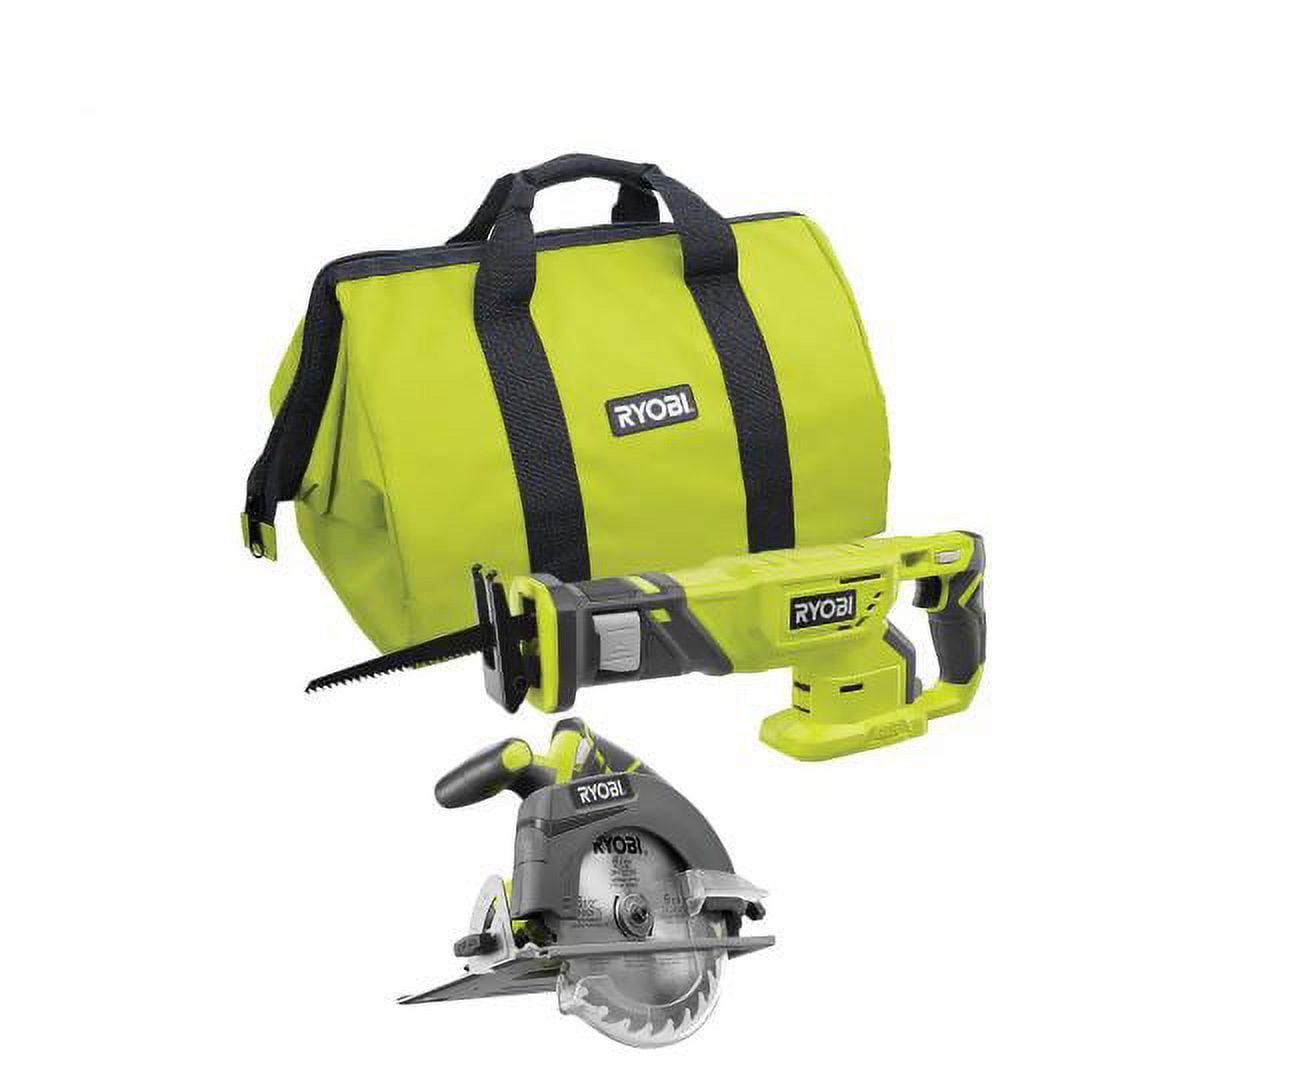 RYOBI 18-Volt ONE+ Lithium-Ion Cordless 6-1/2 in. Circular Saw and